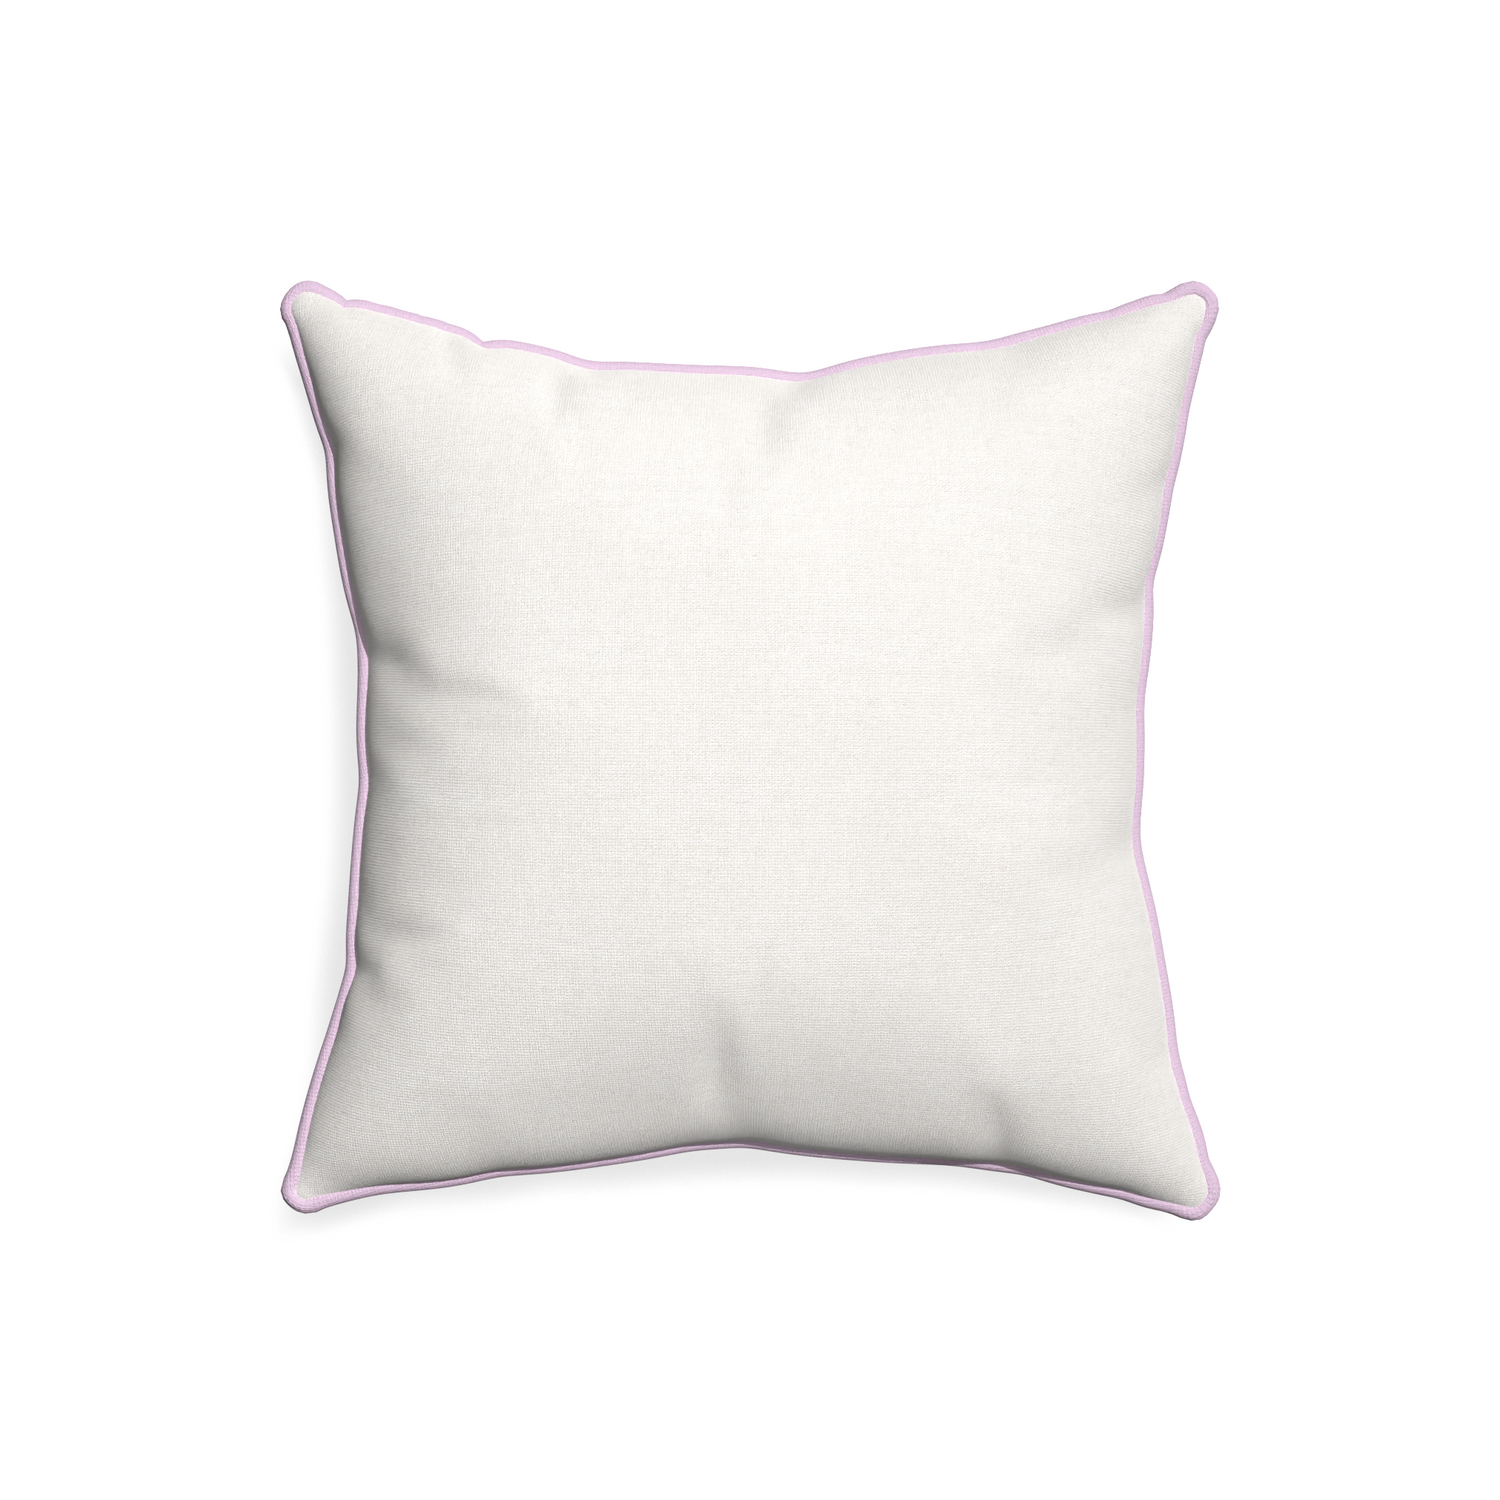 20-square flour custom pillow with l piping on white background